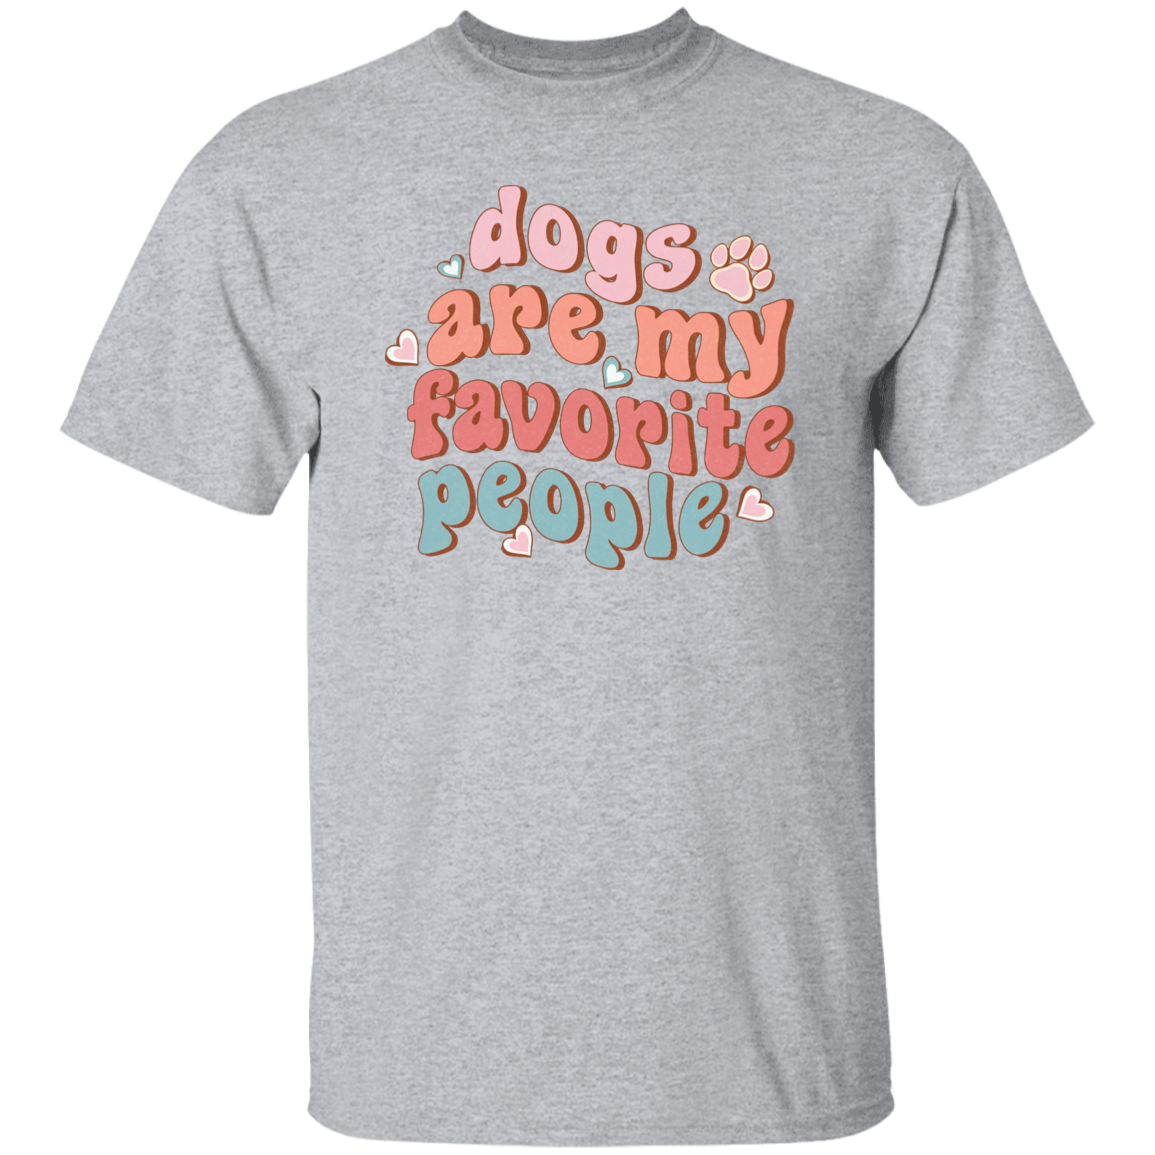 Dogs are My Favorite People T-Shirt